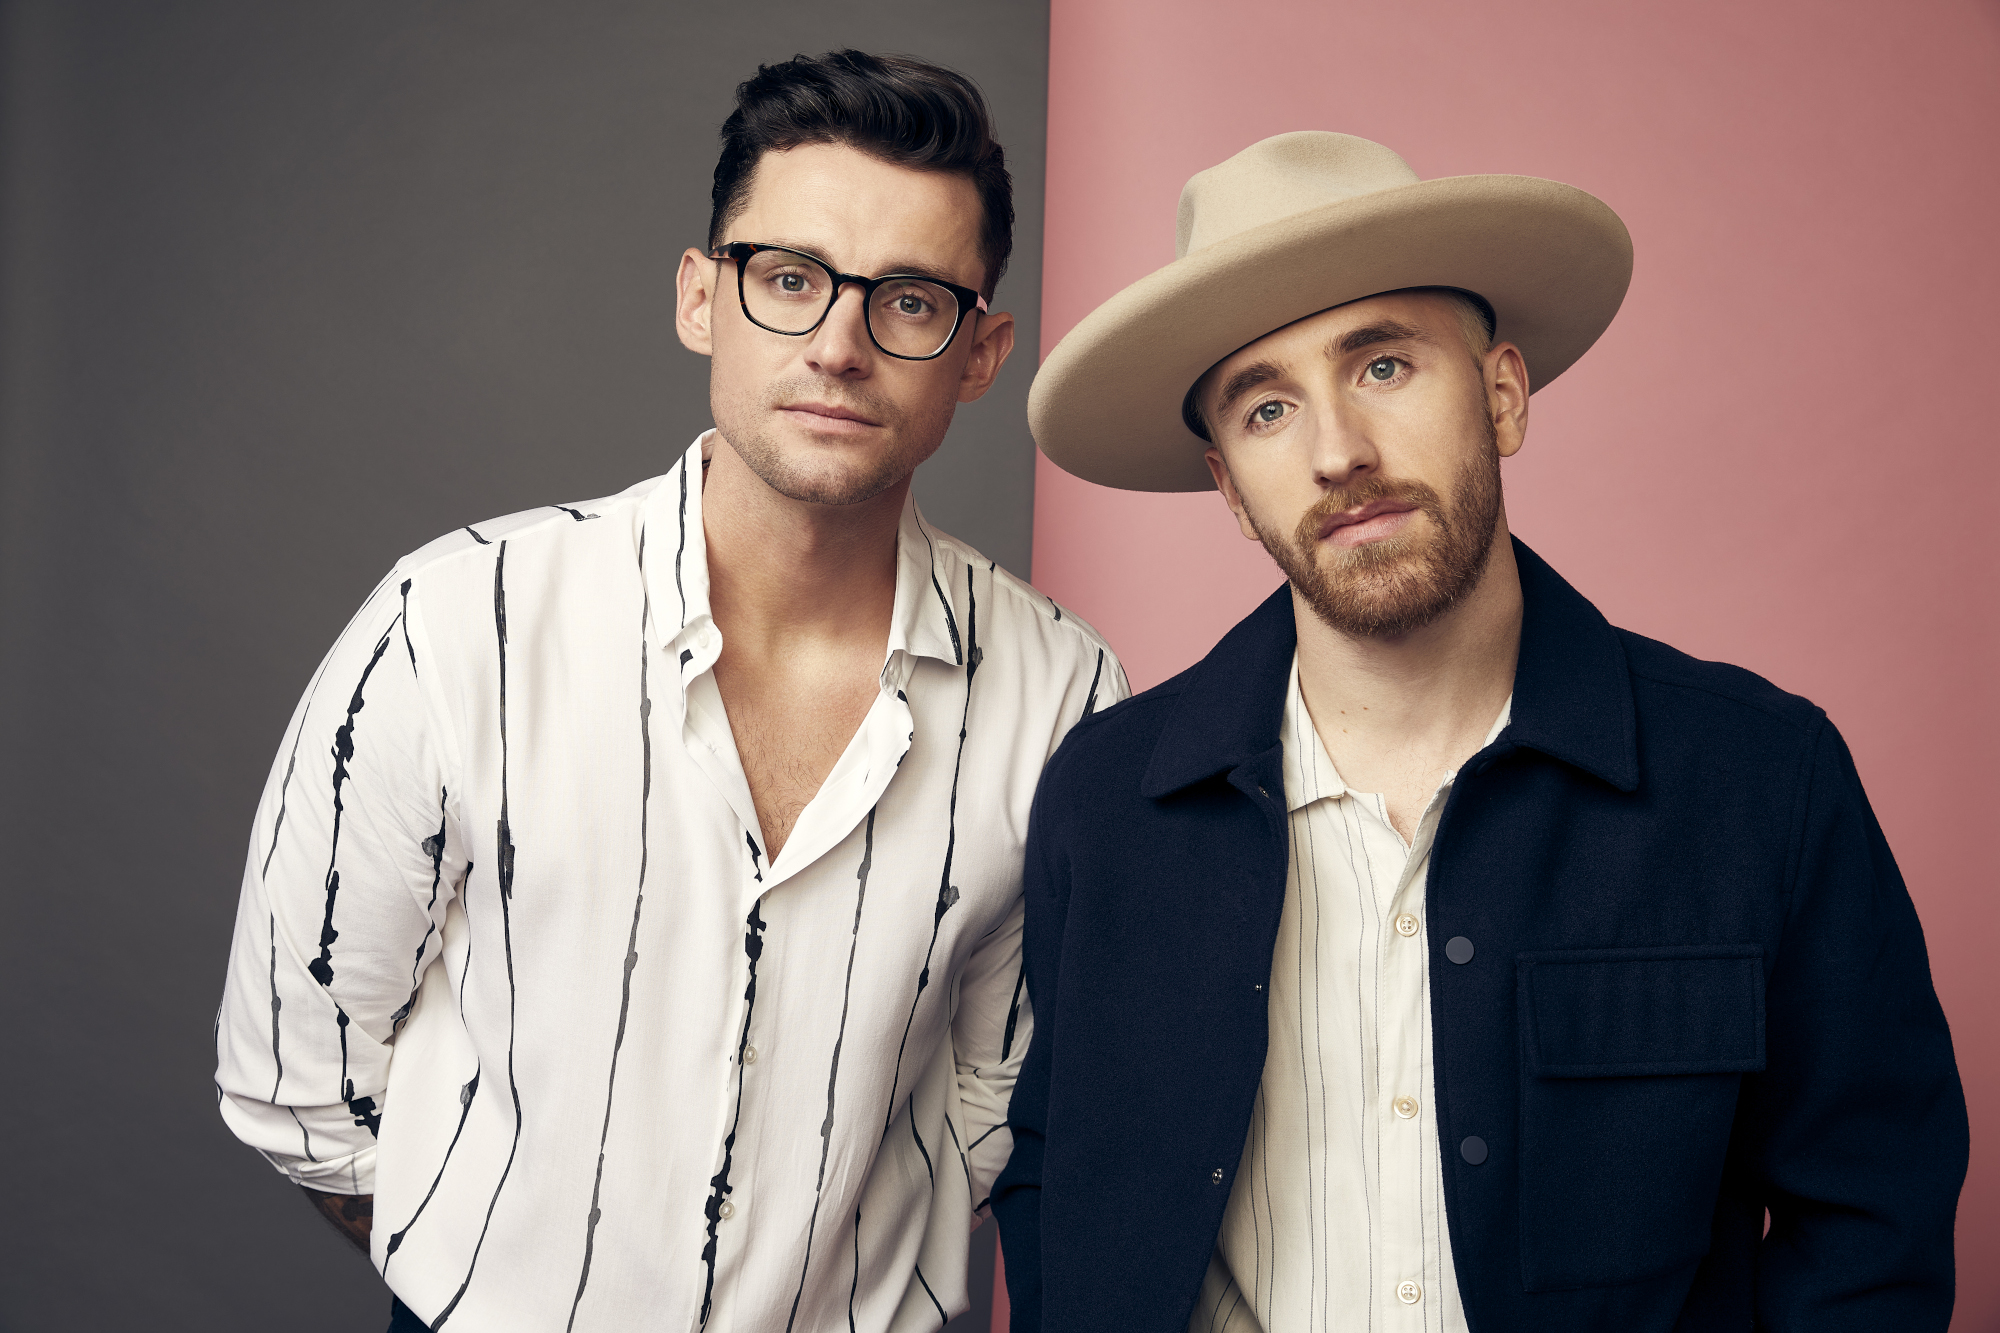 Seaforth’s Brotherly Connection Results in Yet Another Catchy Song “Talk About”